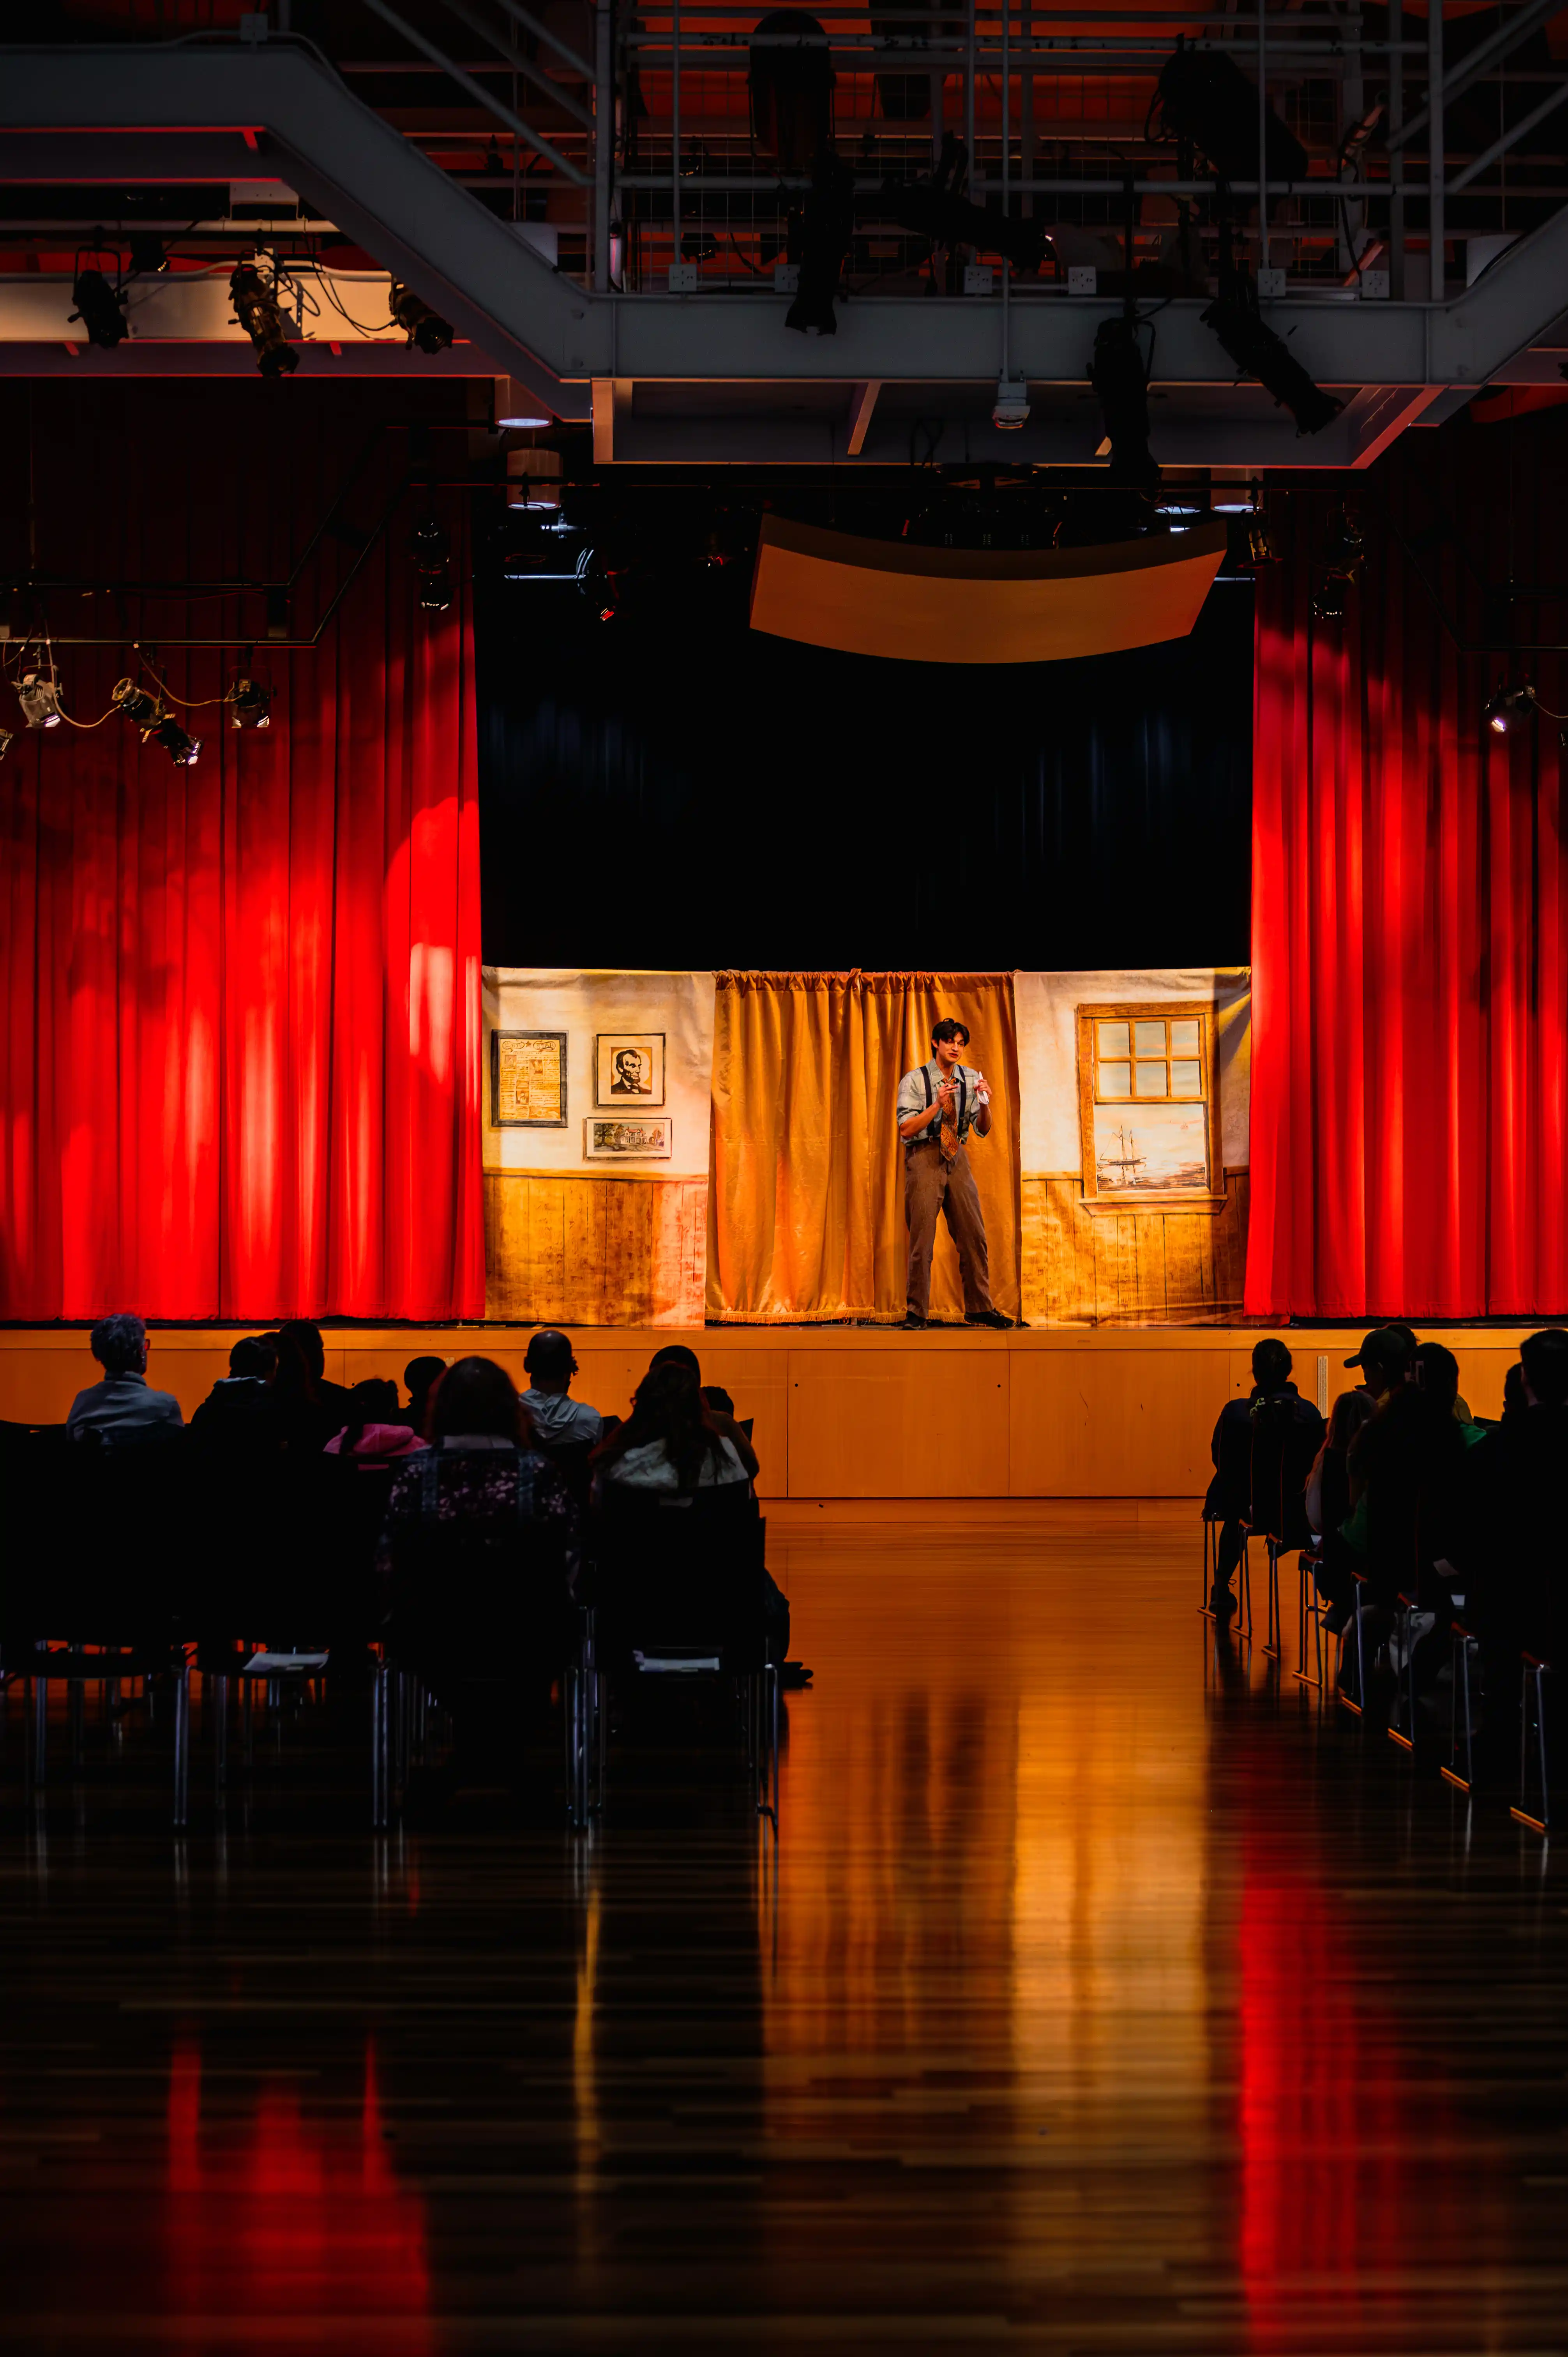 Audience seated in dimmed light watching a lone performer on a brightly lit stage framed by red curtains.